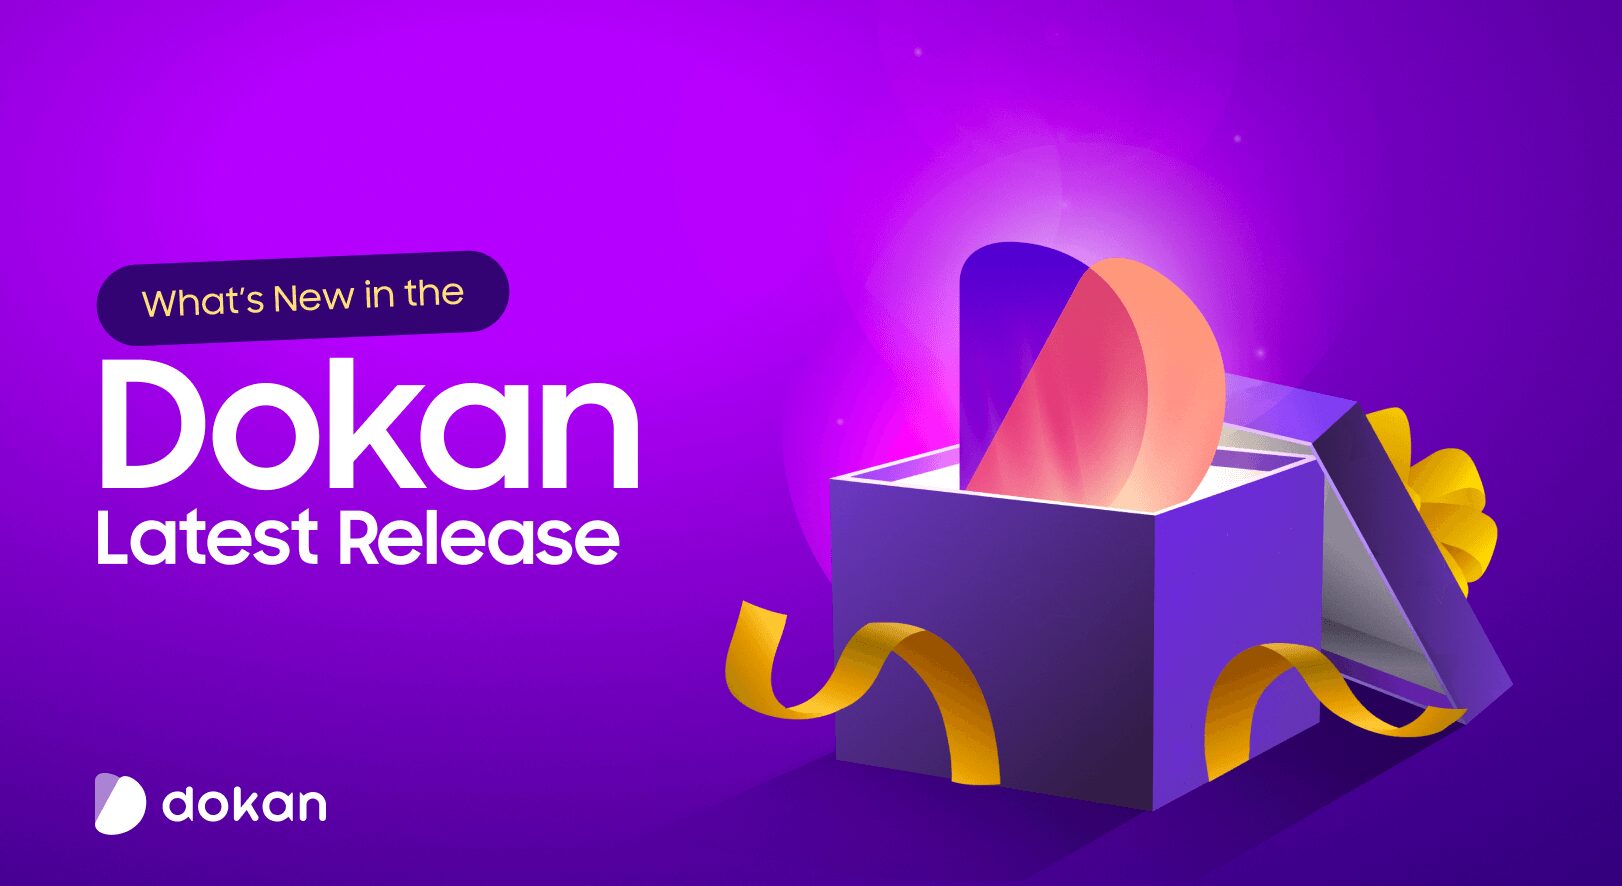 What’s New in the Dokan Latest Release